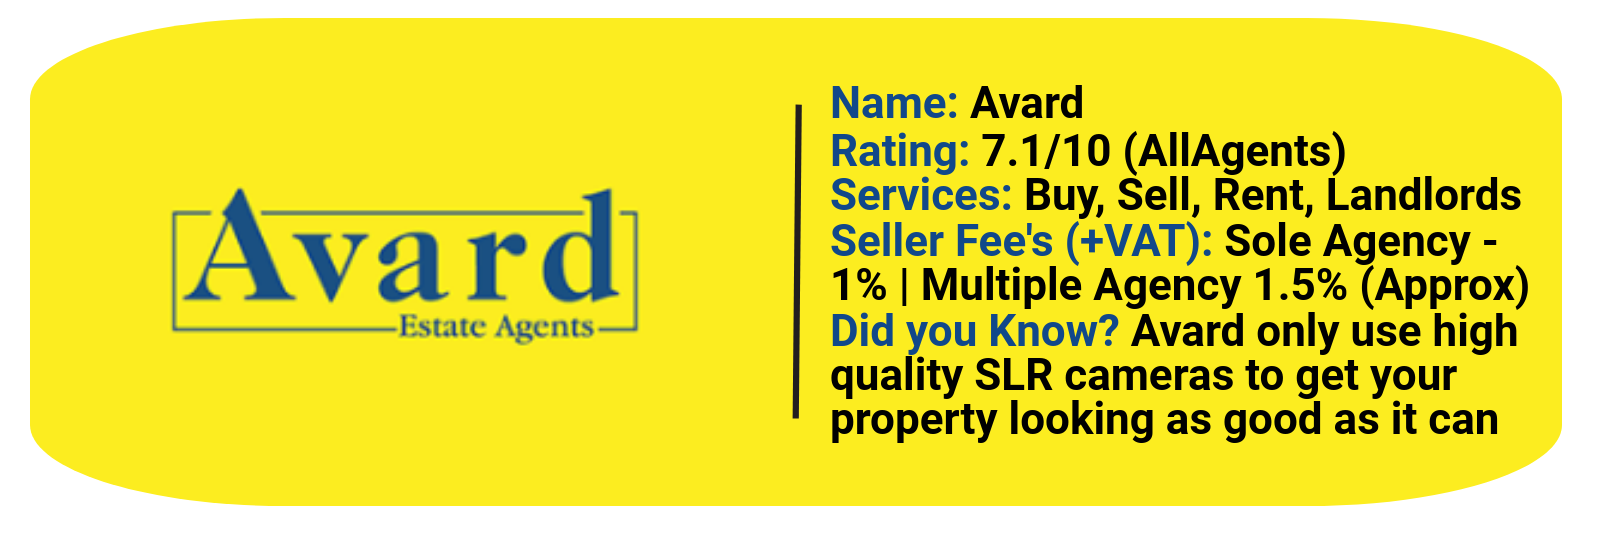 Avards statistics featuring rating, services & seller fee's